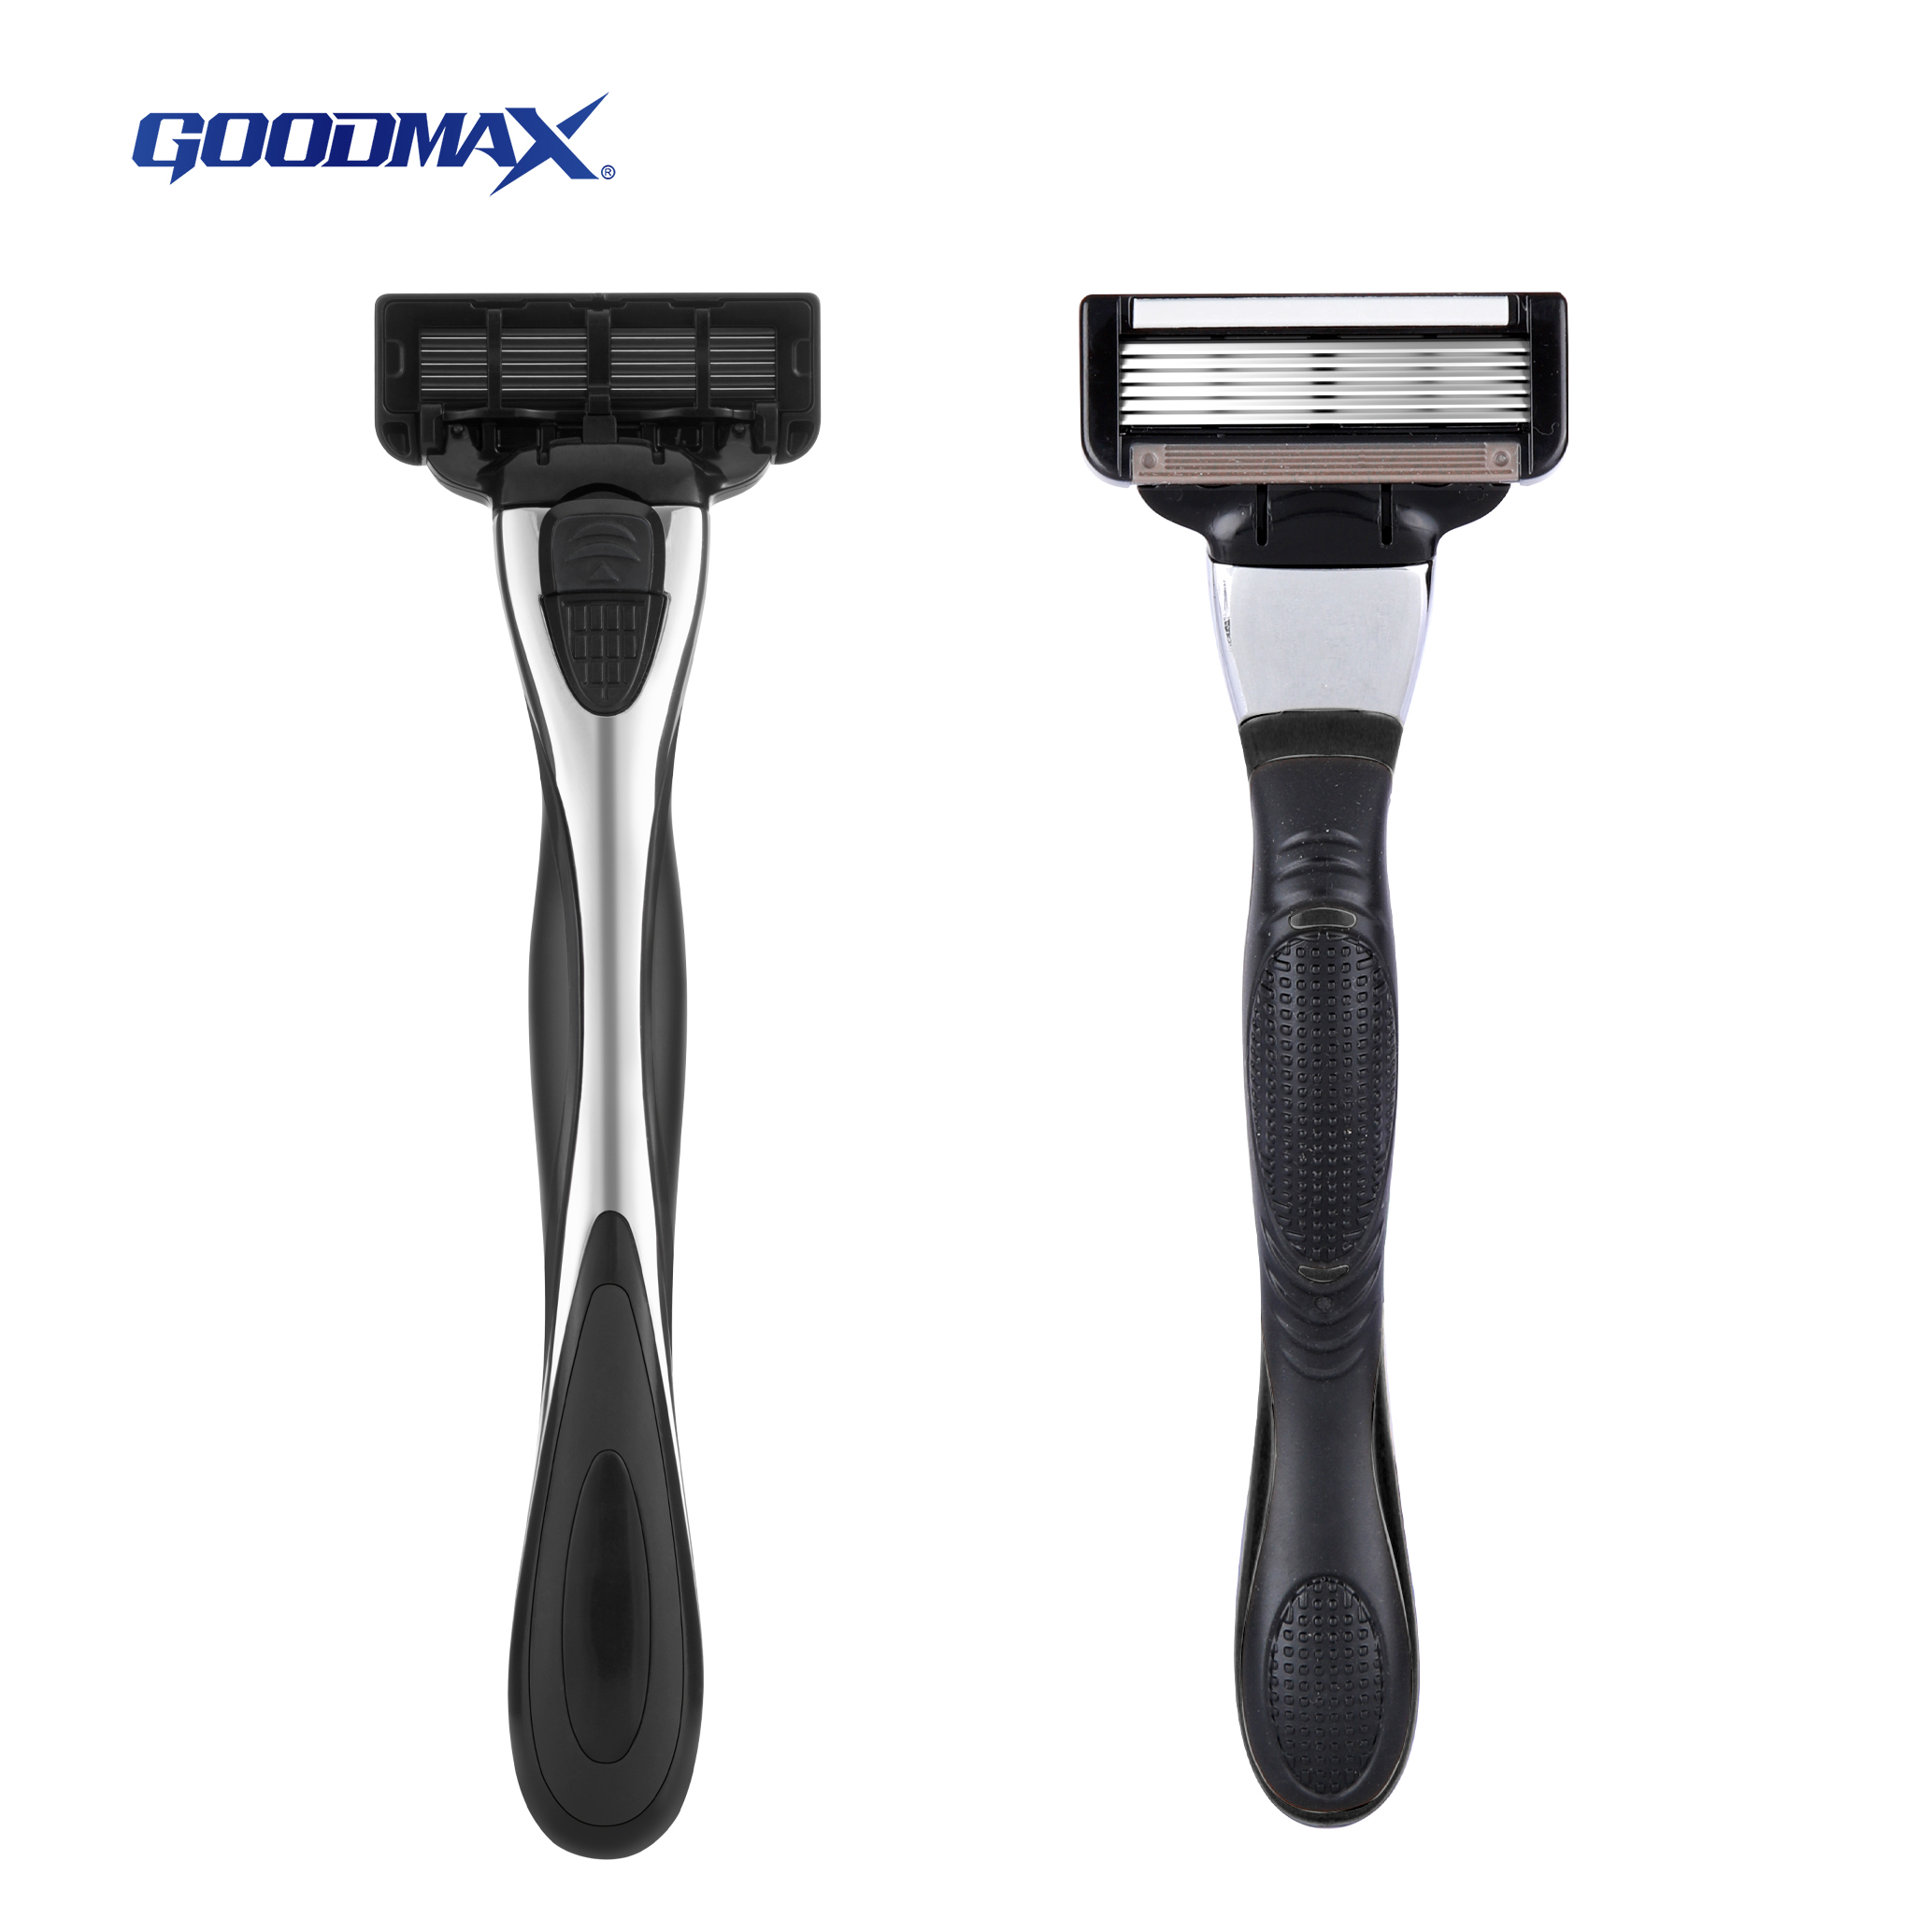 The more blades for razor, the better shaving experience comes